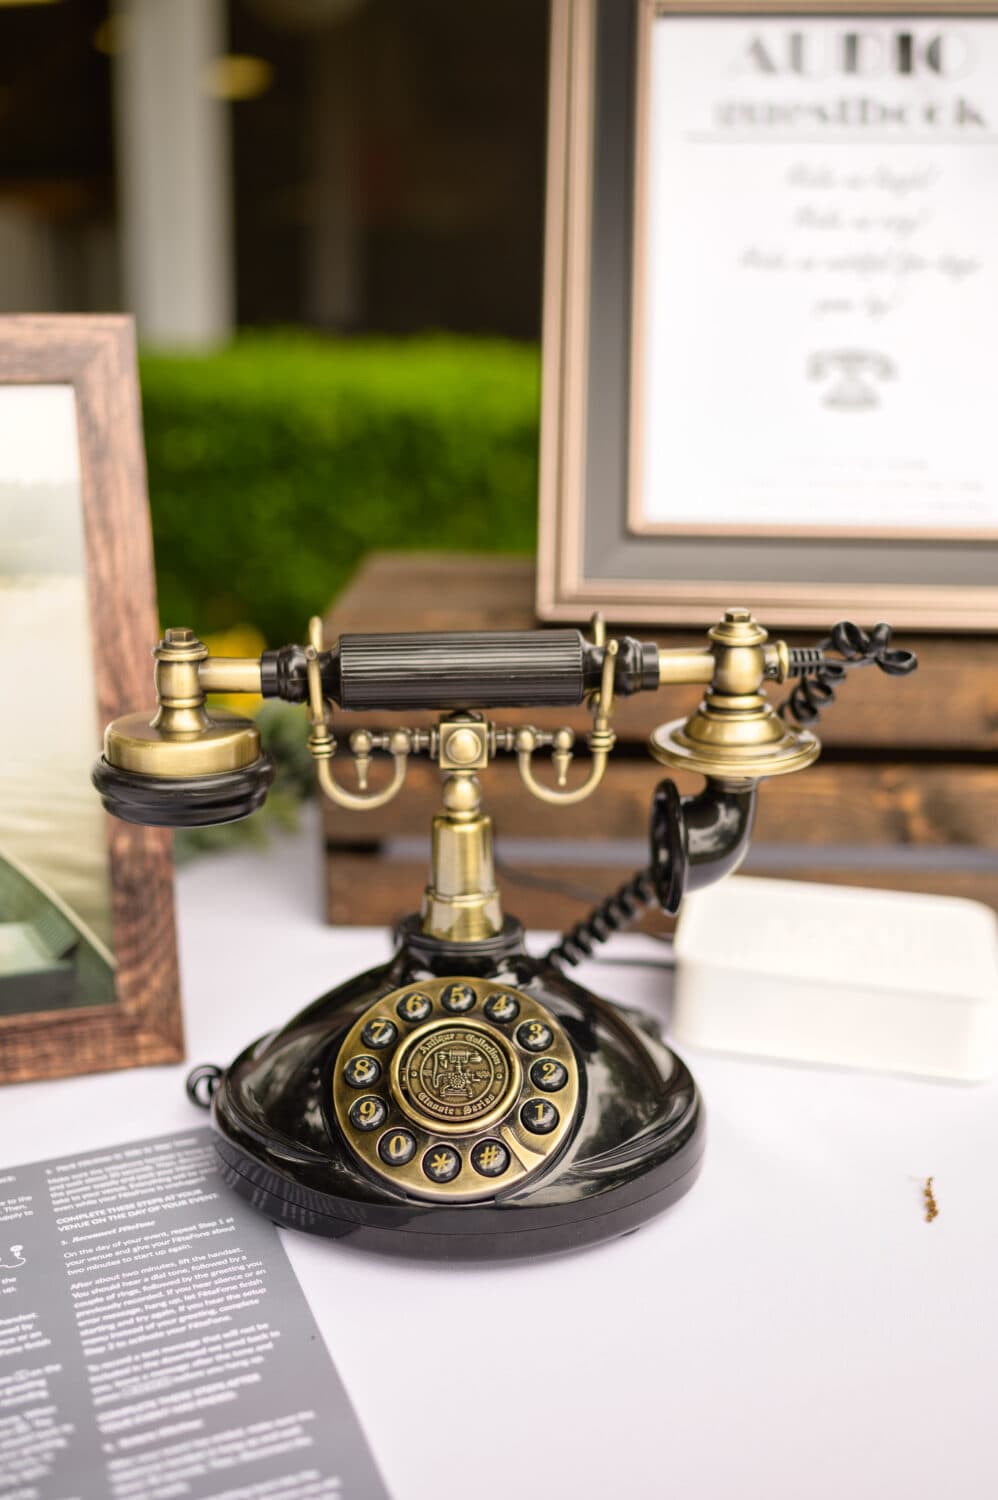 Old phone to leave a message for the bride and groom - Caledonia Golf & Fish Club